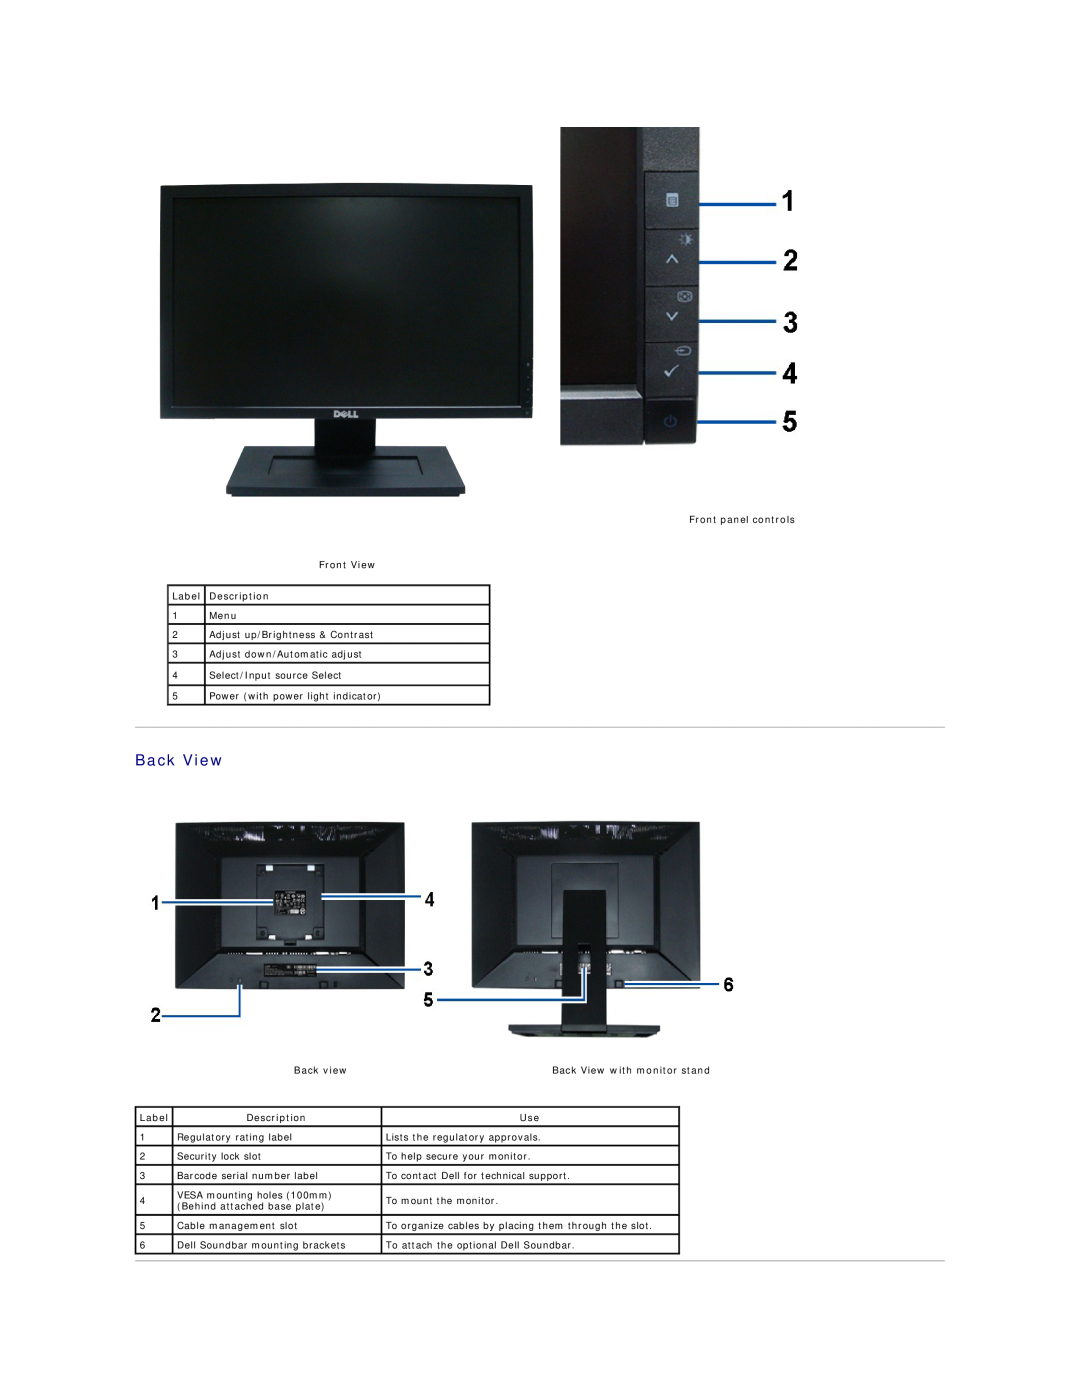 Dell E1909W appendix Front panel controls, Front View, Label, Description, Back view, Back View with monitor stand 